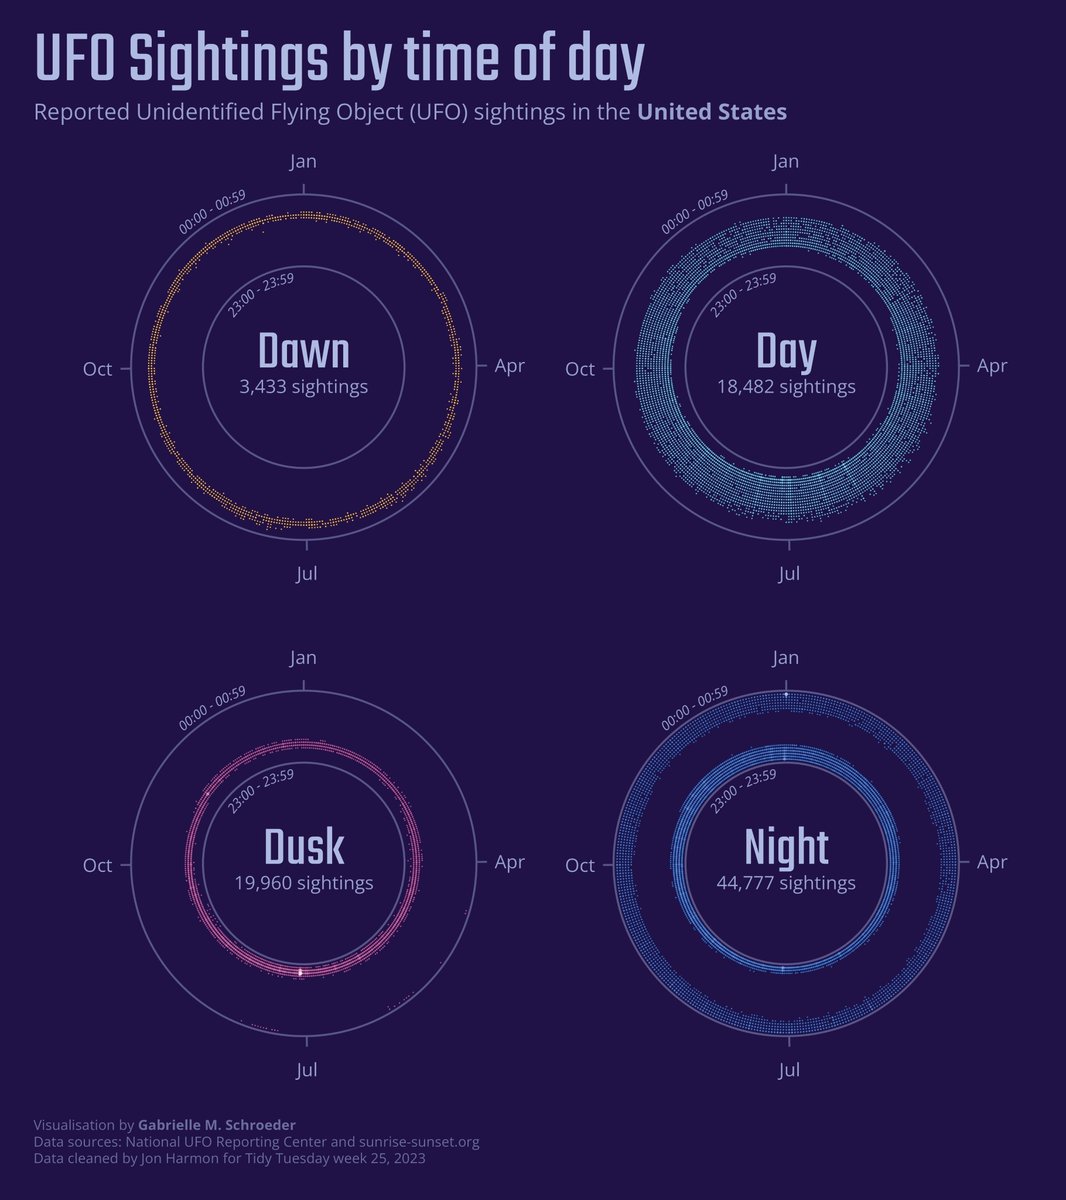 My week 25 #TidyTuesday vis of when UFO sightings occur in the US. This was a fun dataset! I learned a lot about dealing with different time zones and also tried out {patchwork} for the first time. 

code: github.com/gmschroe/tidyt…

#rstats #tidyverse #r4ds